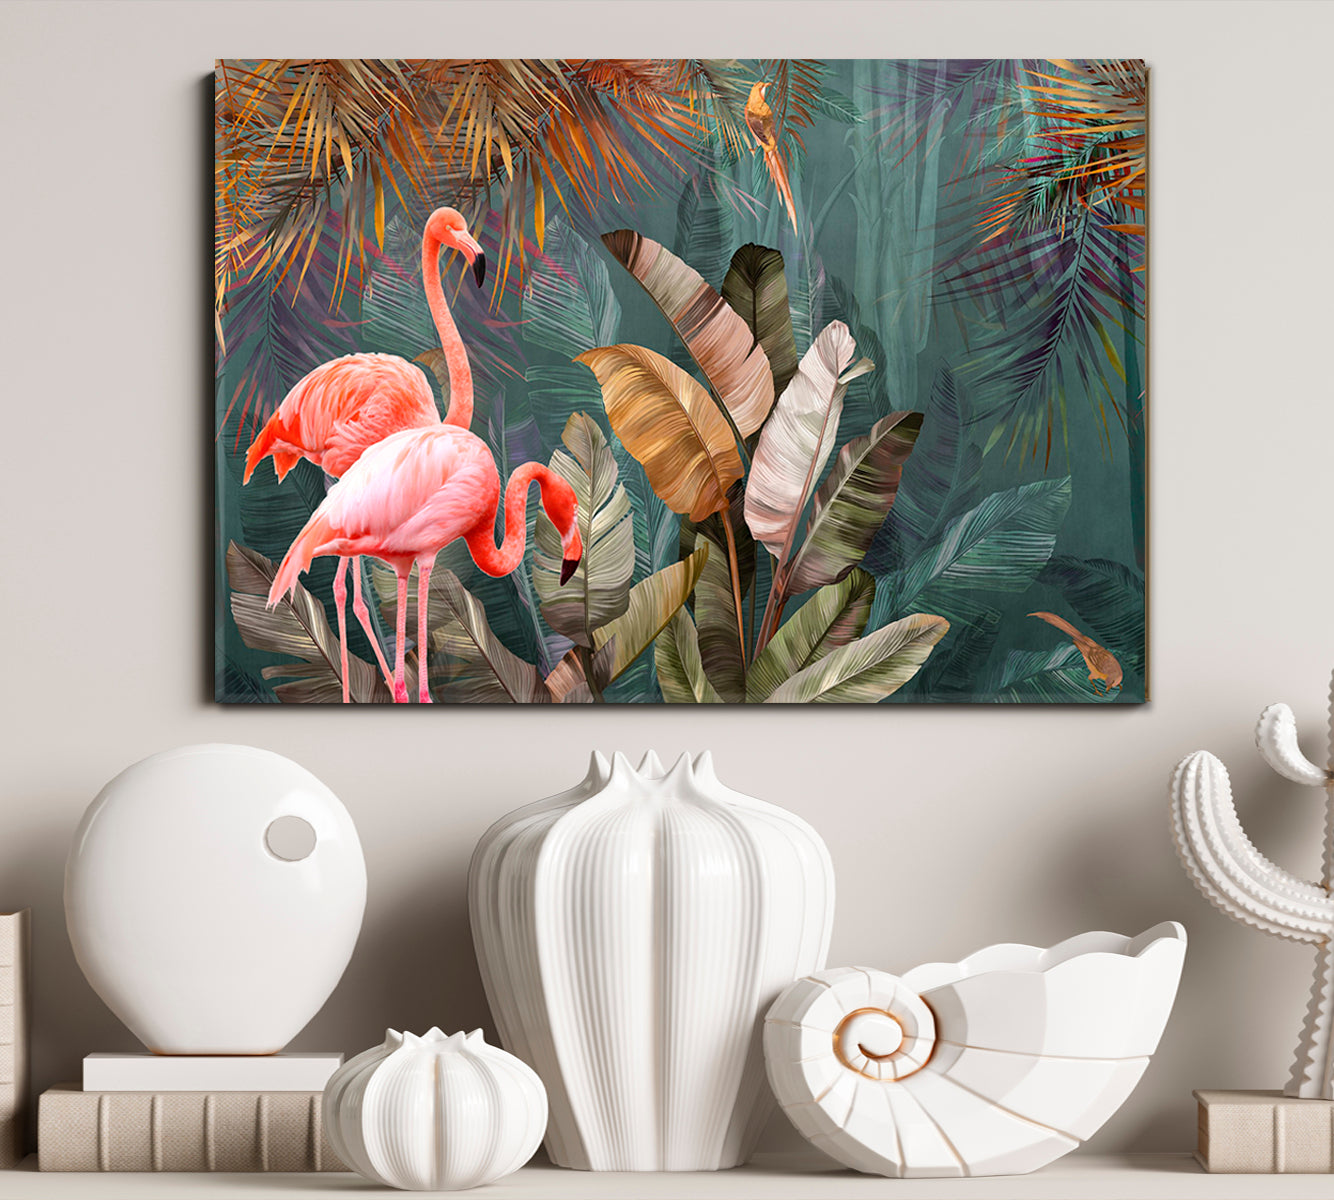 Flamingo And Tropical Jungle Rainforest Pattern Poster Tropical, Exotic Art Print Artesty 1 panel 24" x 16" 